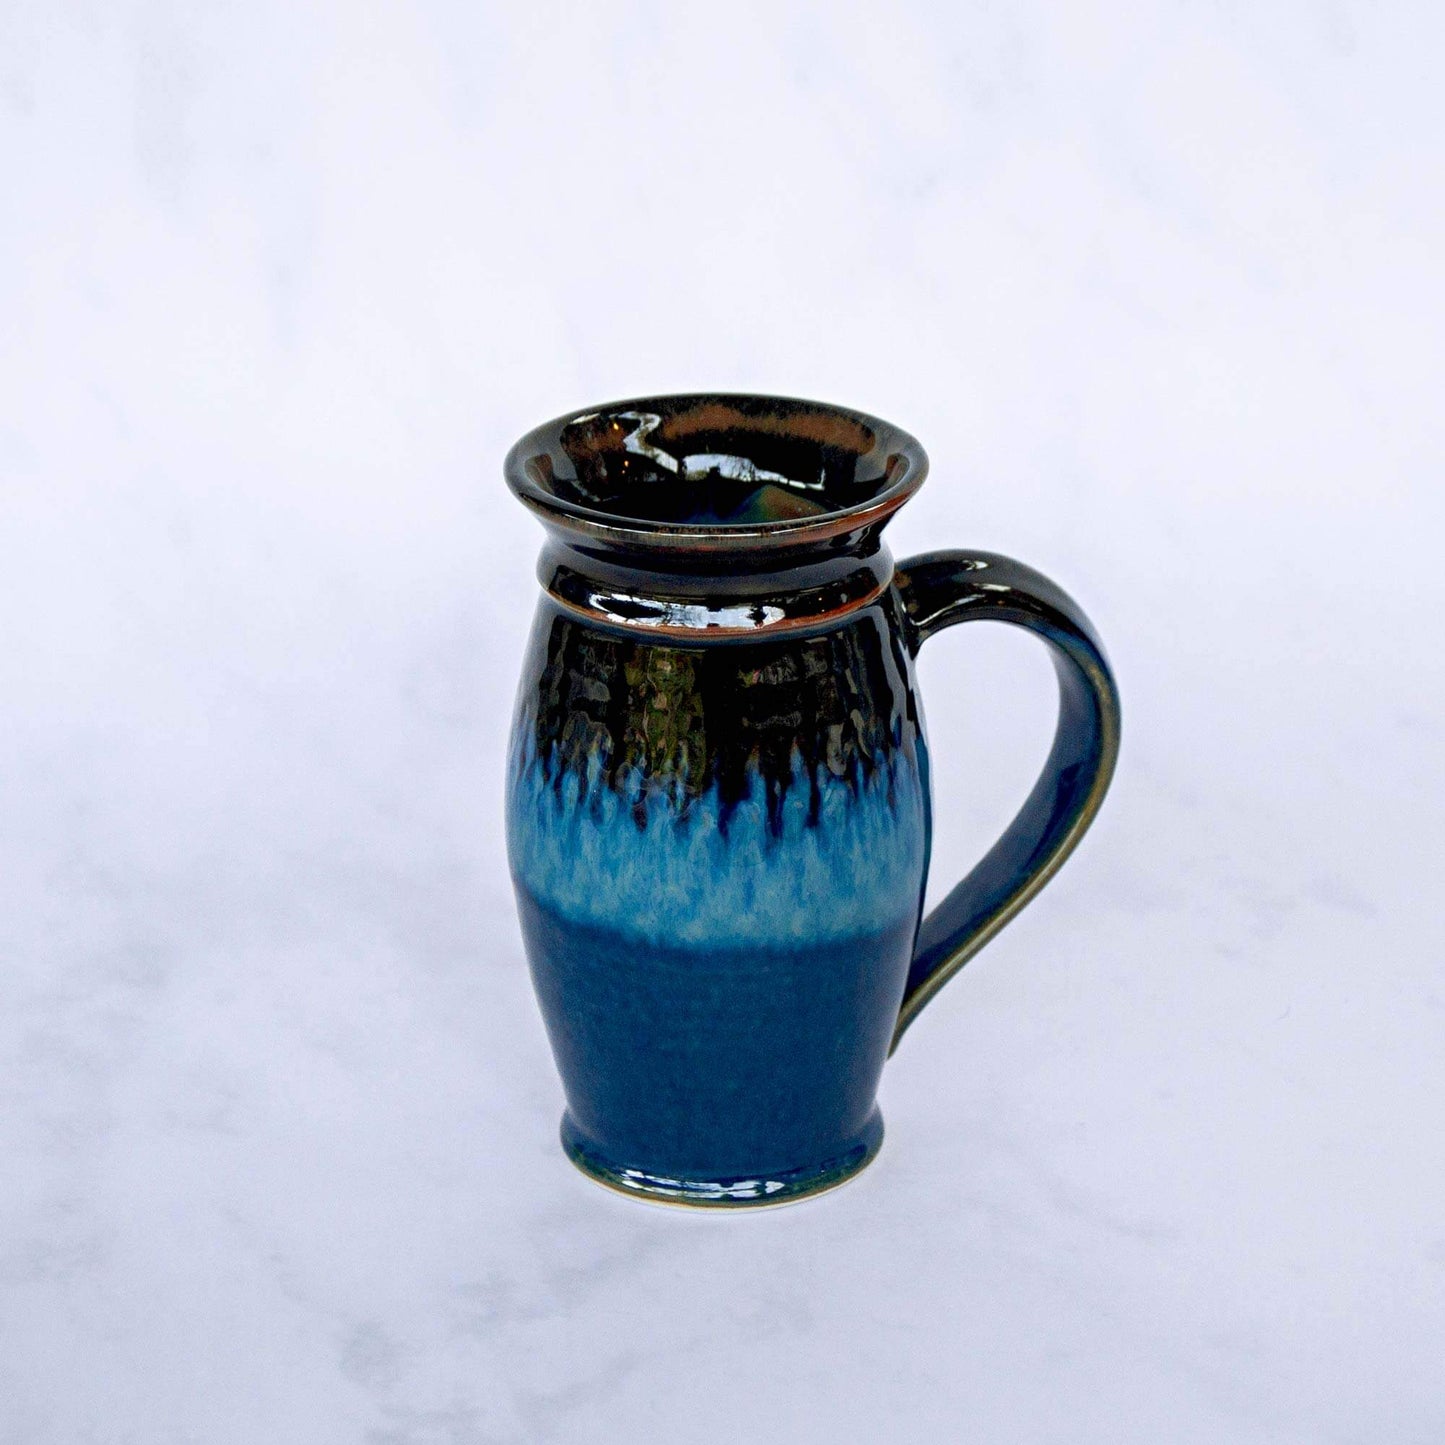 Handmade Pottery Beer Stein in Blue Hamada pattern made by Georgetown Pottery in Maine